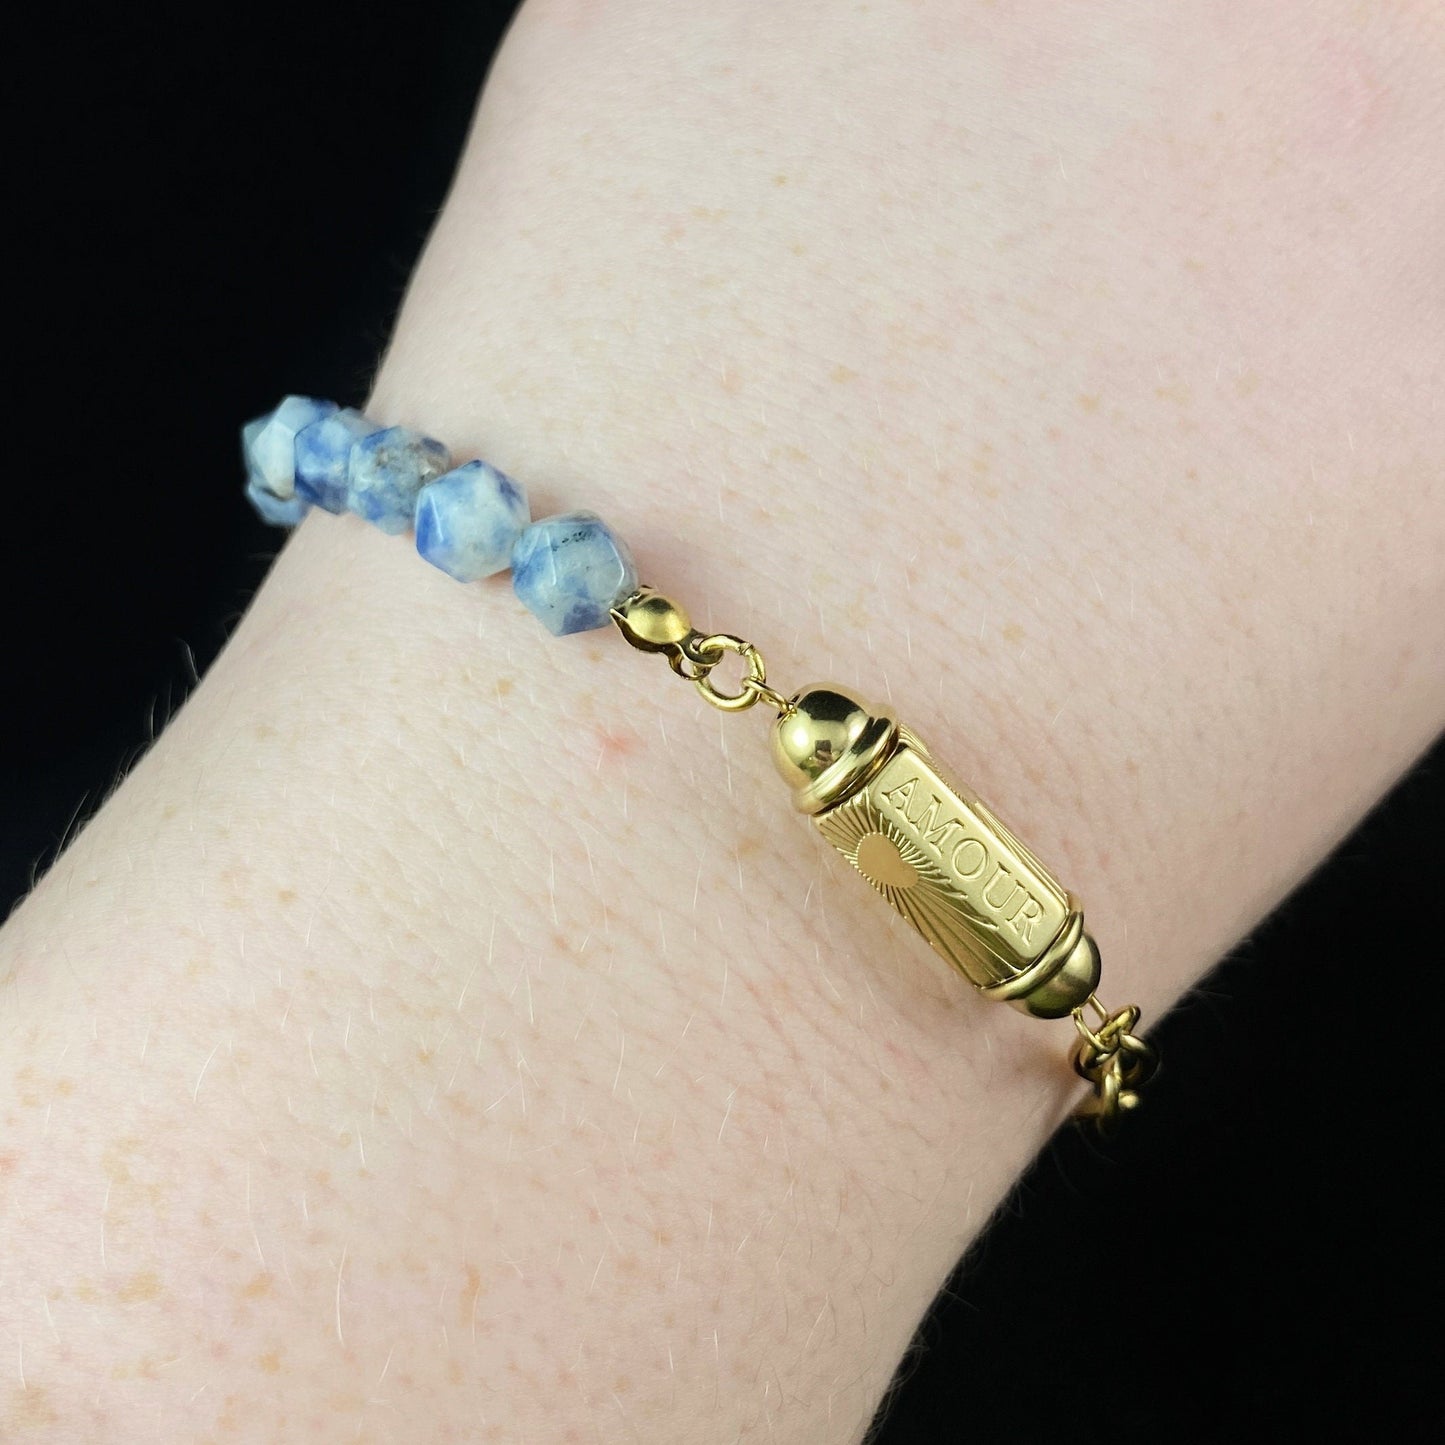 Blue Natural Stone Bracelet with Love/Amour Calligraphy and Dainty Gold Heart Detailing